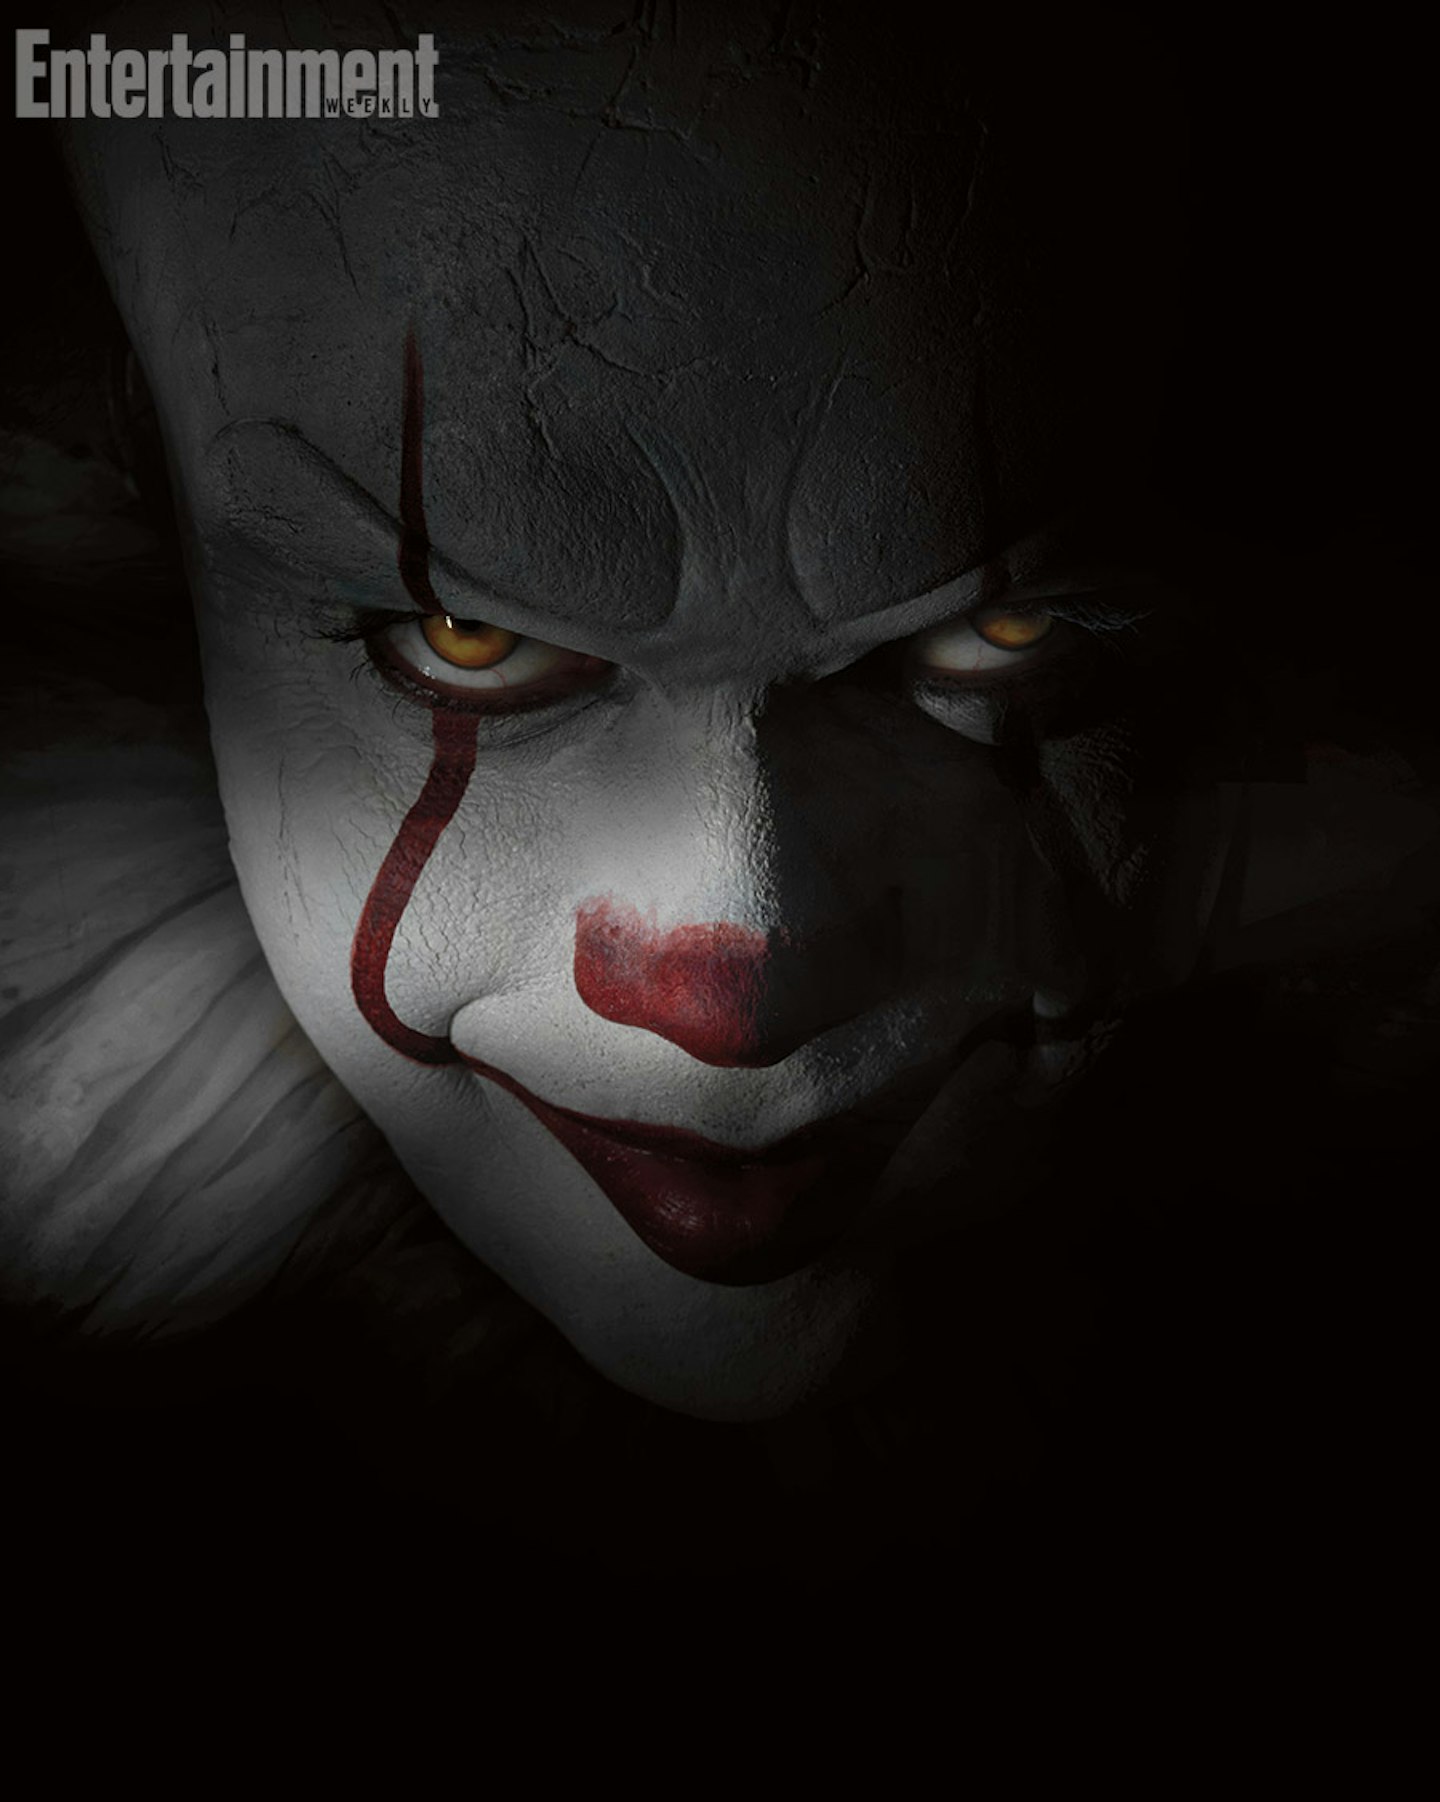 Bill Skarsgard as Pennywise from It